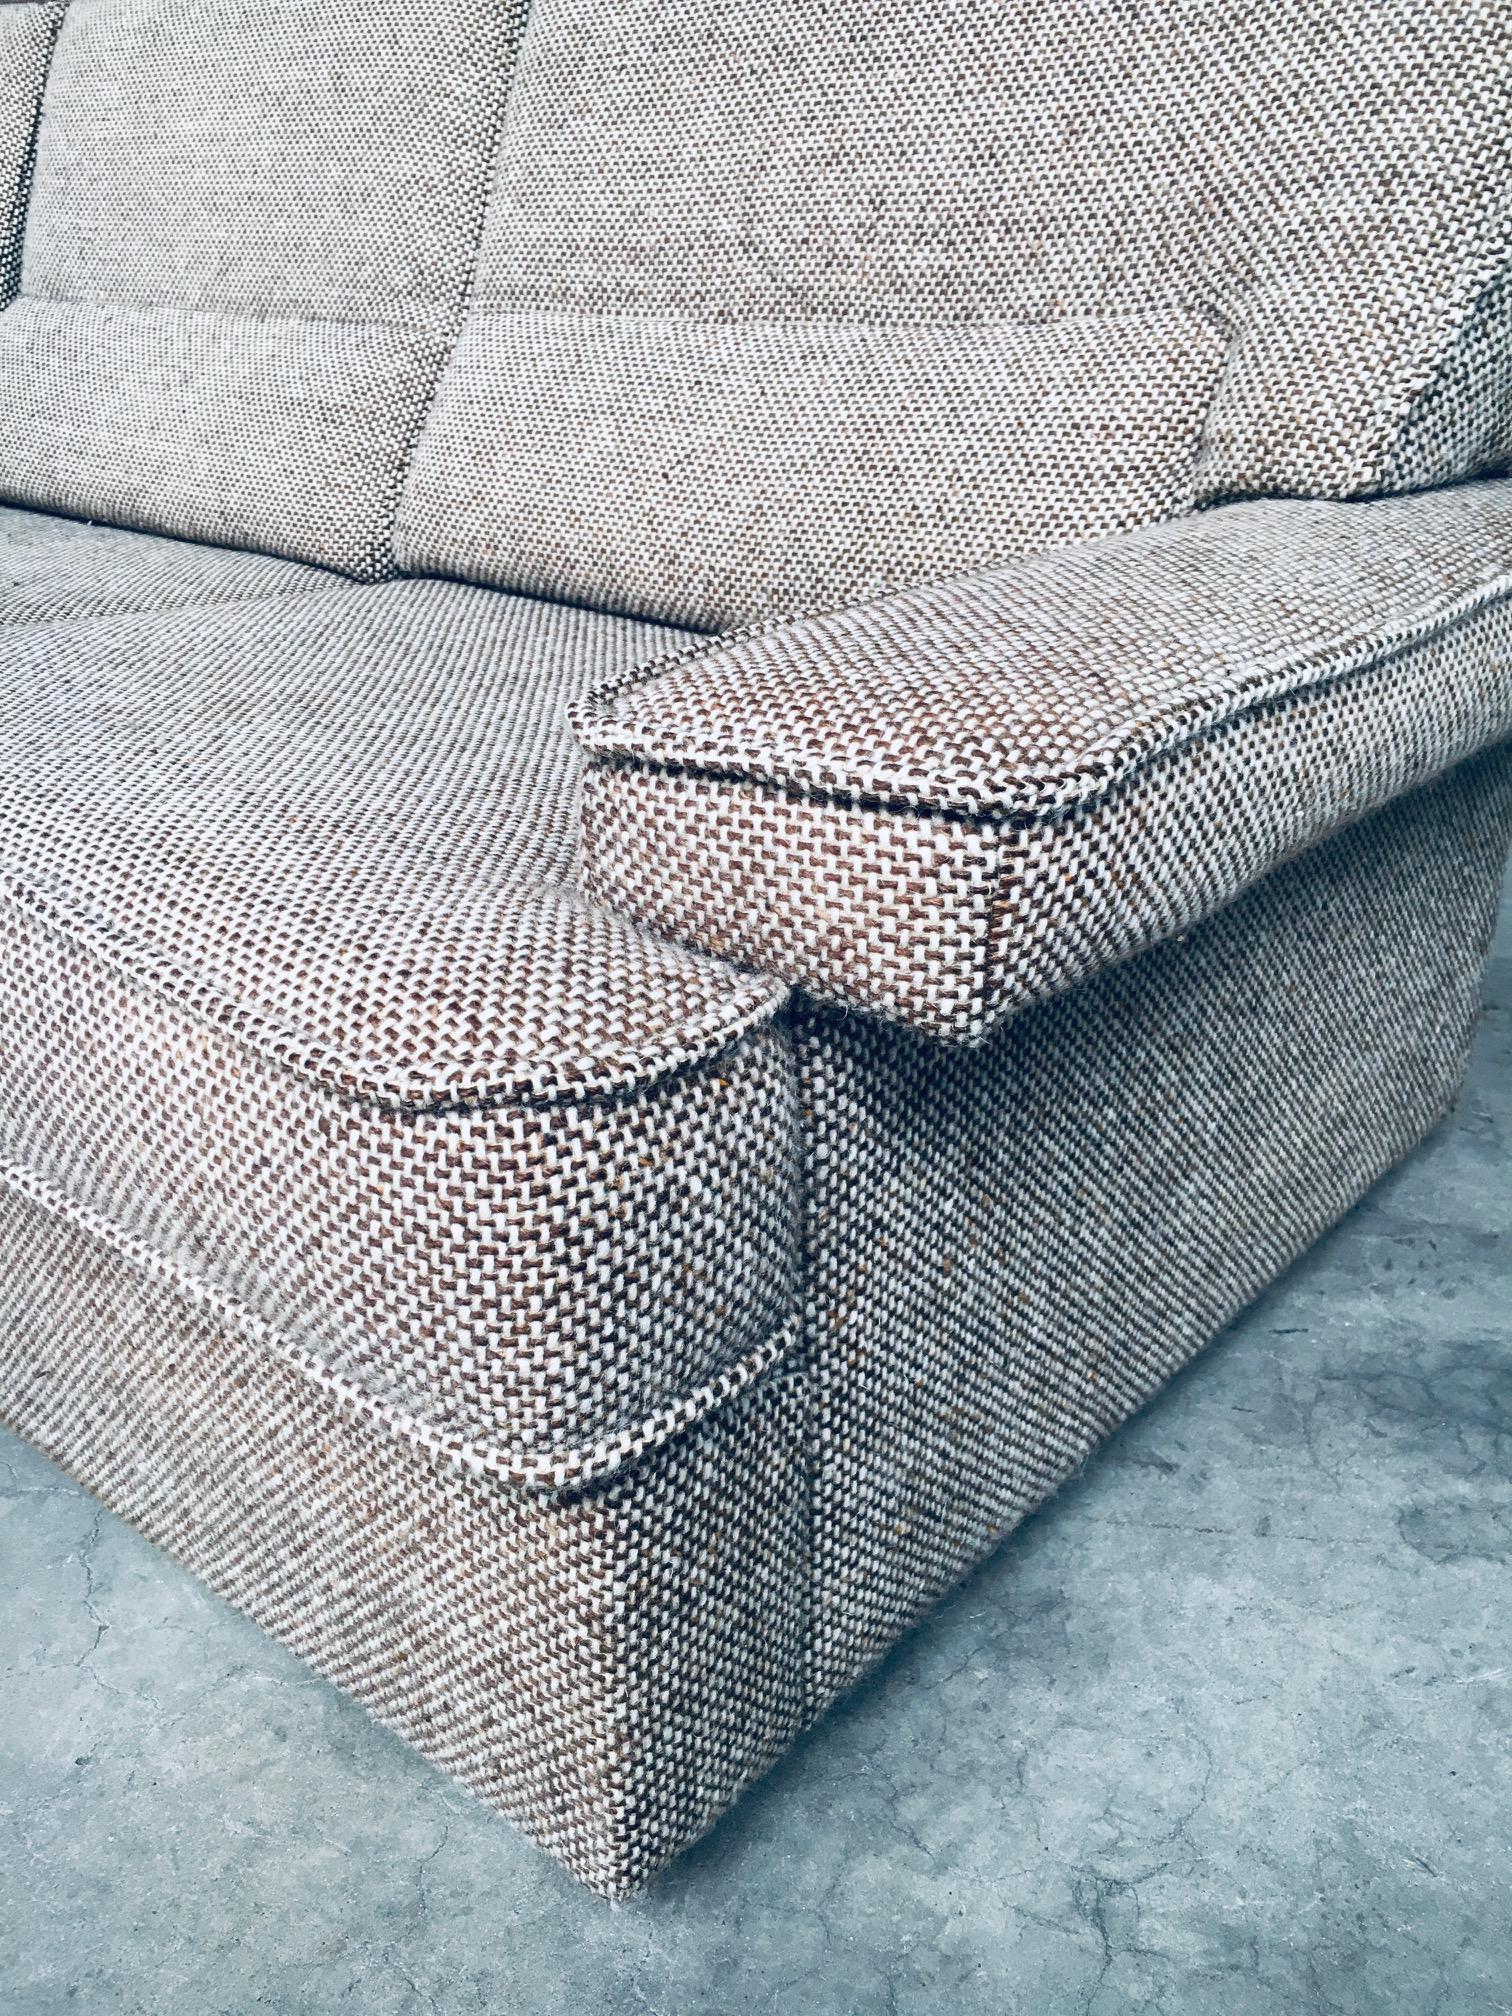 Midcentury Modern Design Boucle 3 Seat Sofa, Italy 1970's For Sale 7